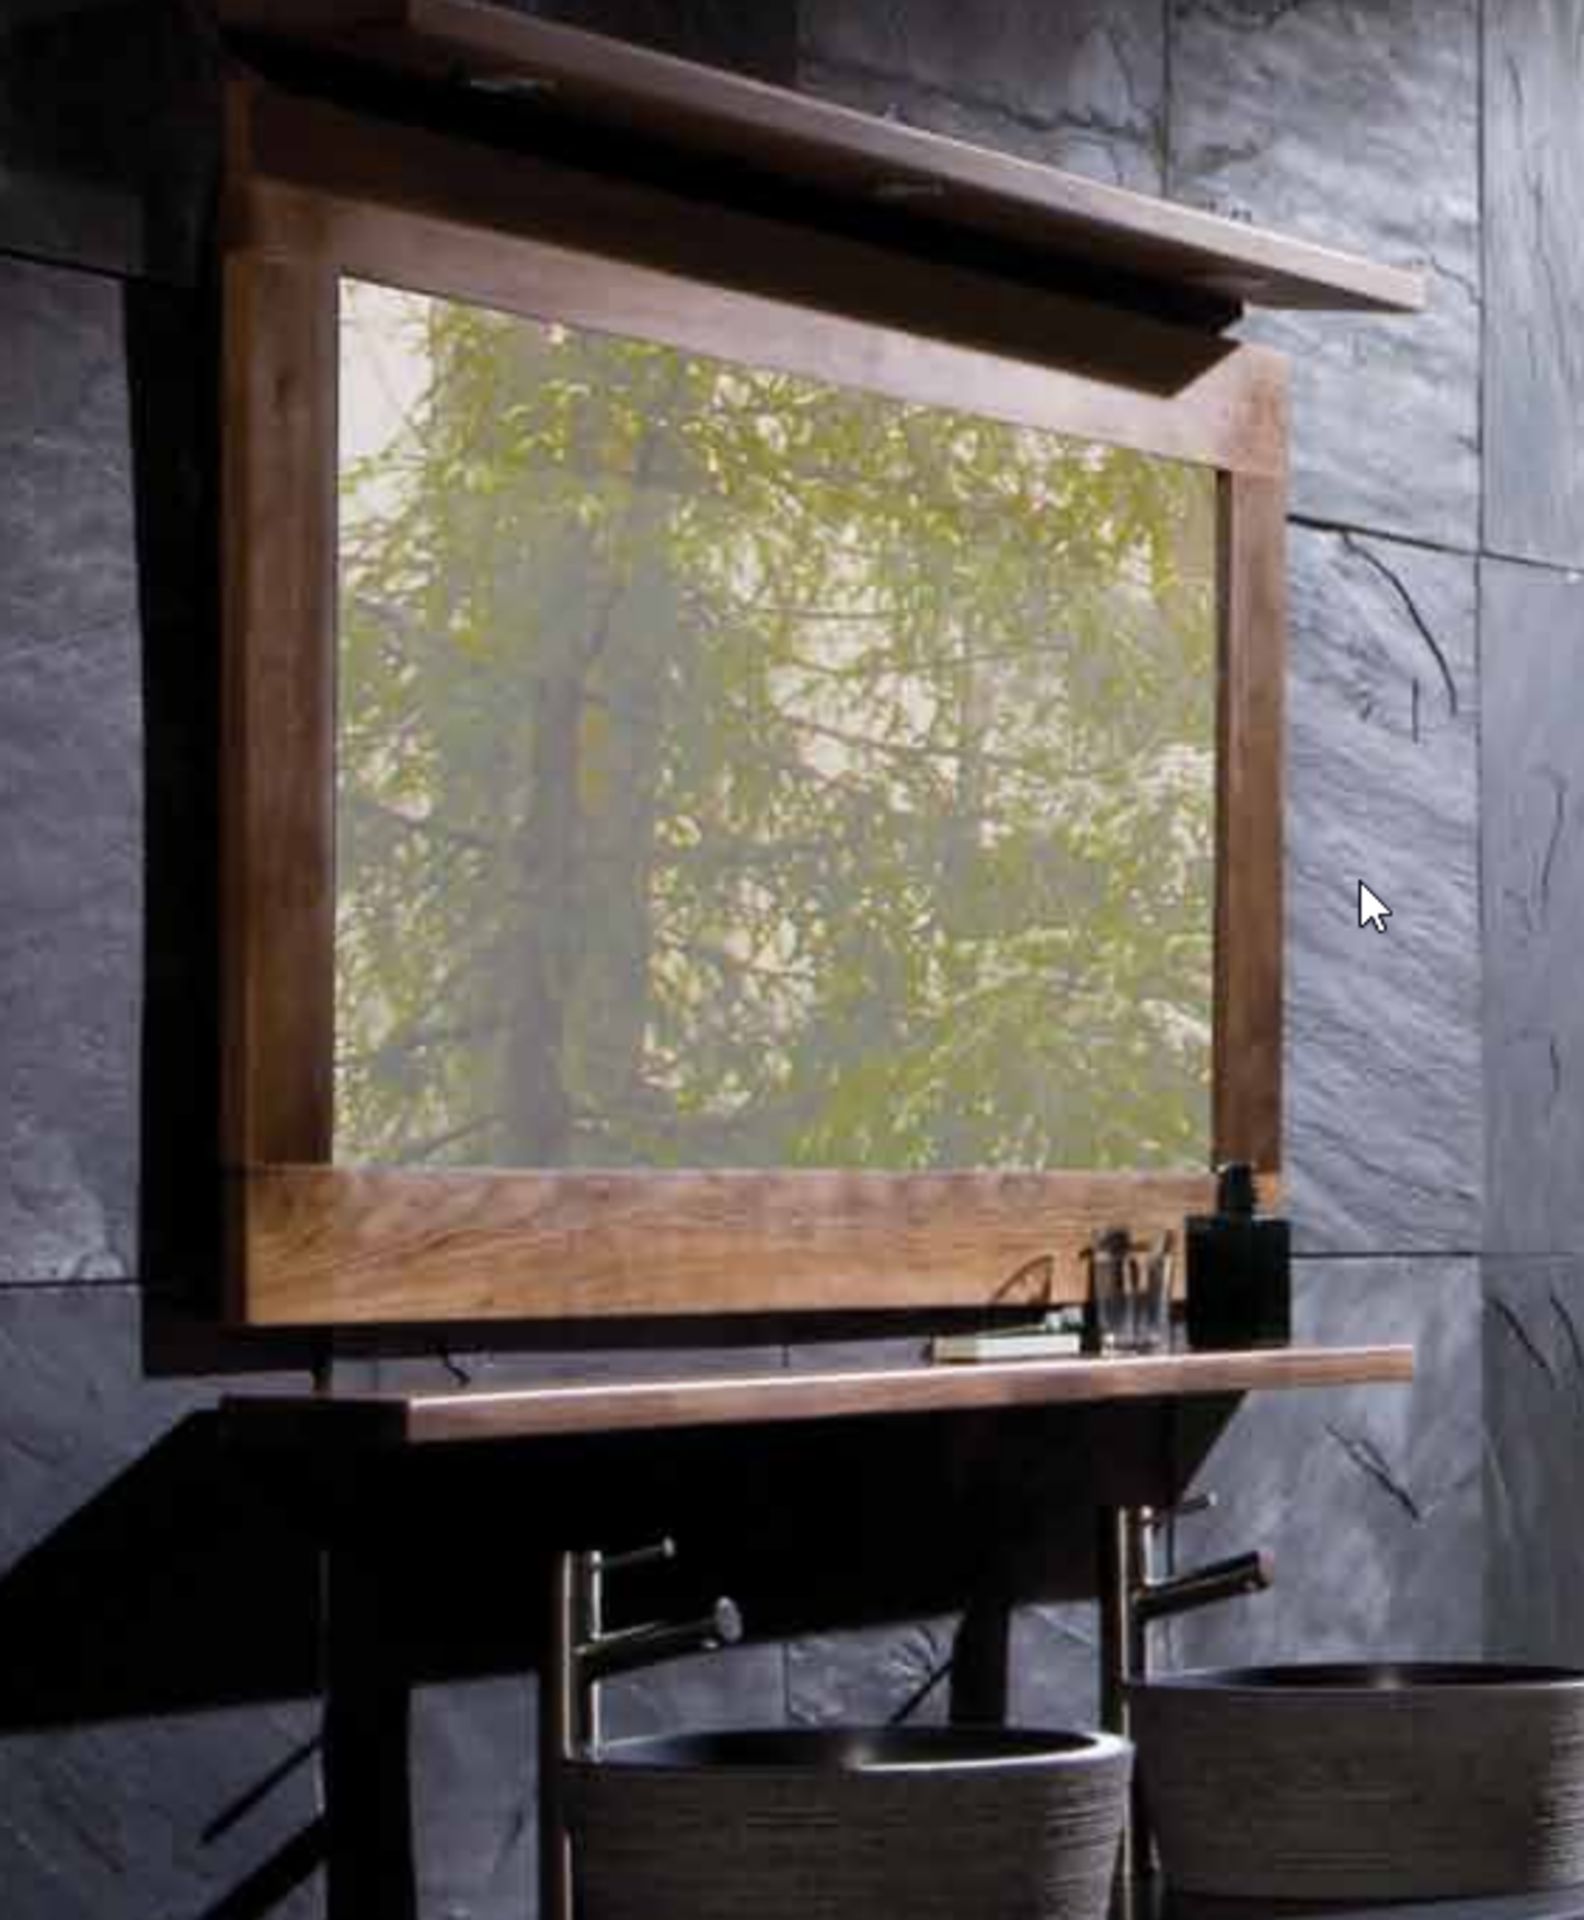 1 x Stonearth Bathroom Wall Mirror - American Solid Walnut Frame With Bevelled Glass - Size: Medium - Image 4 of 9